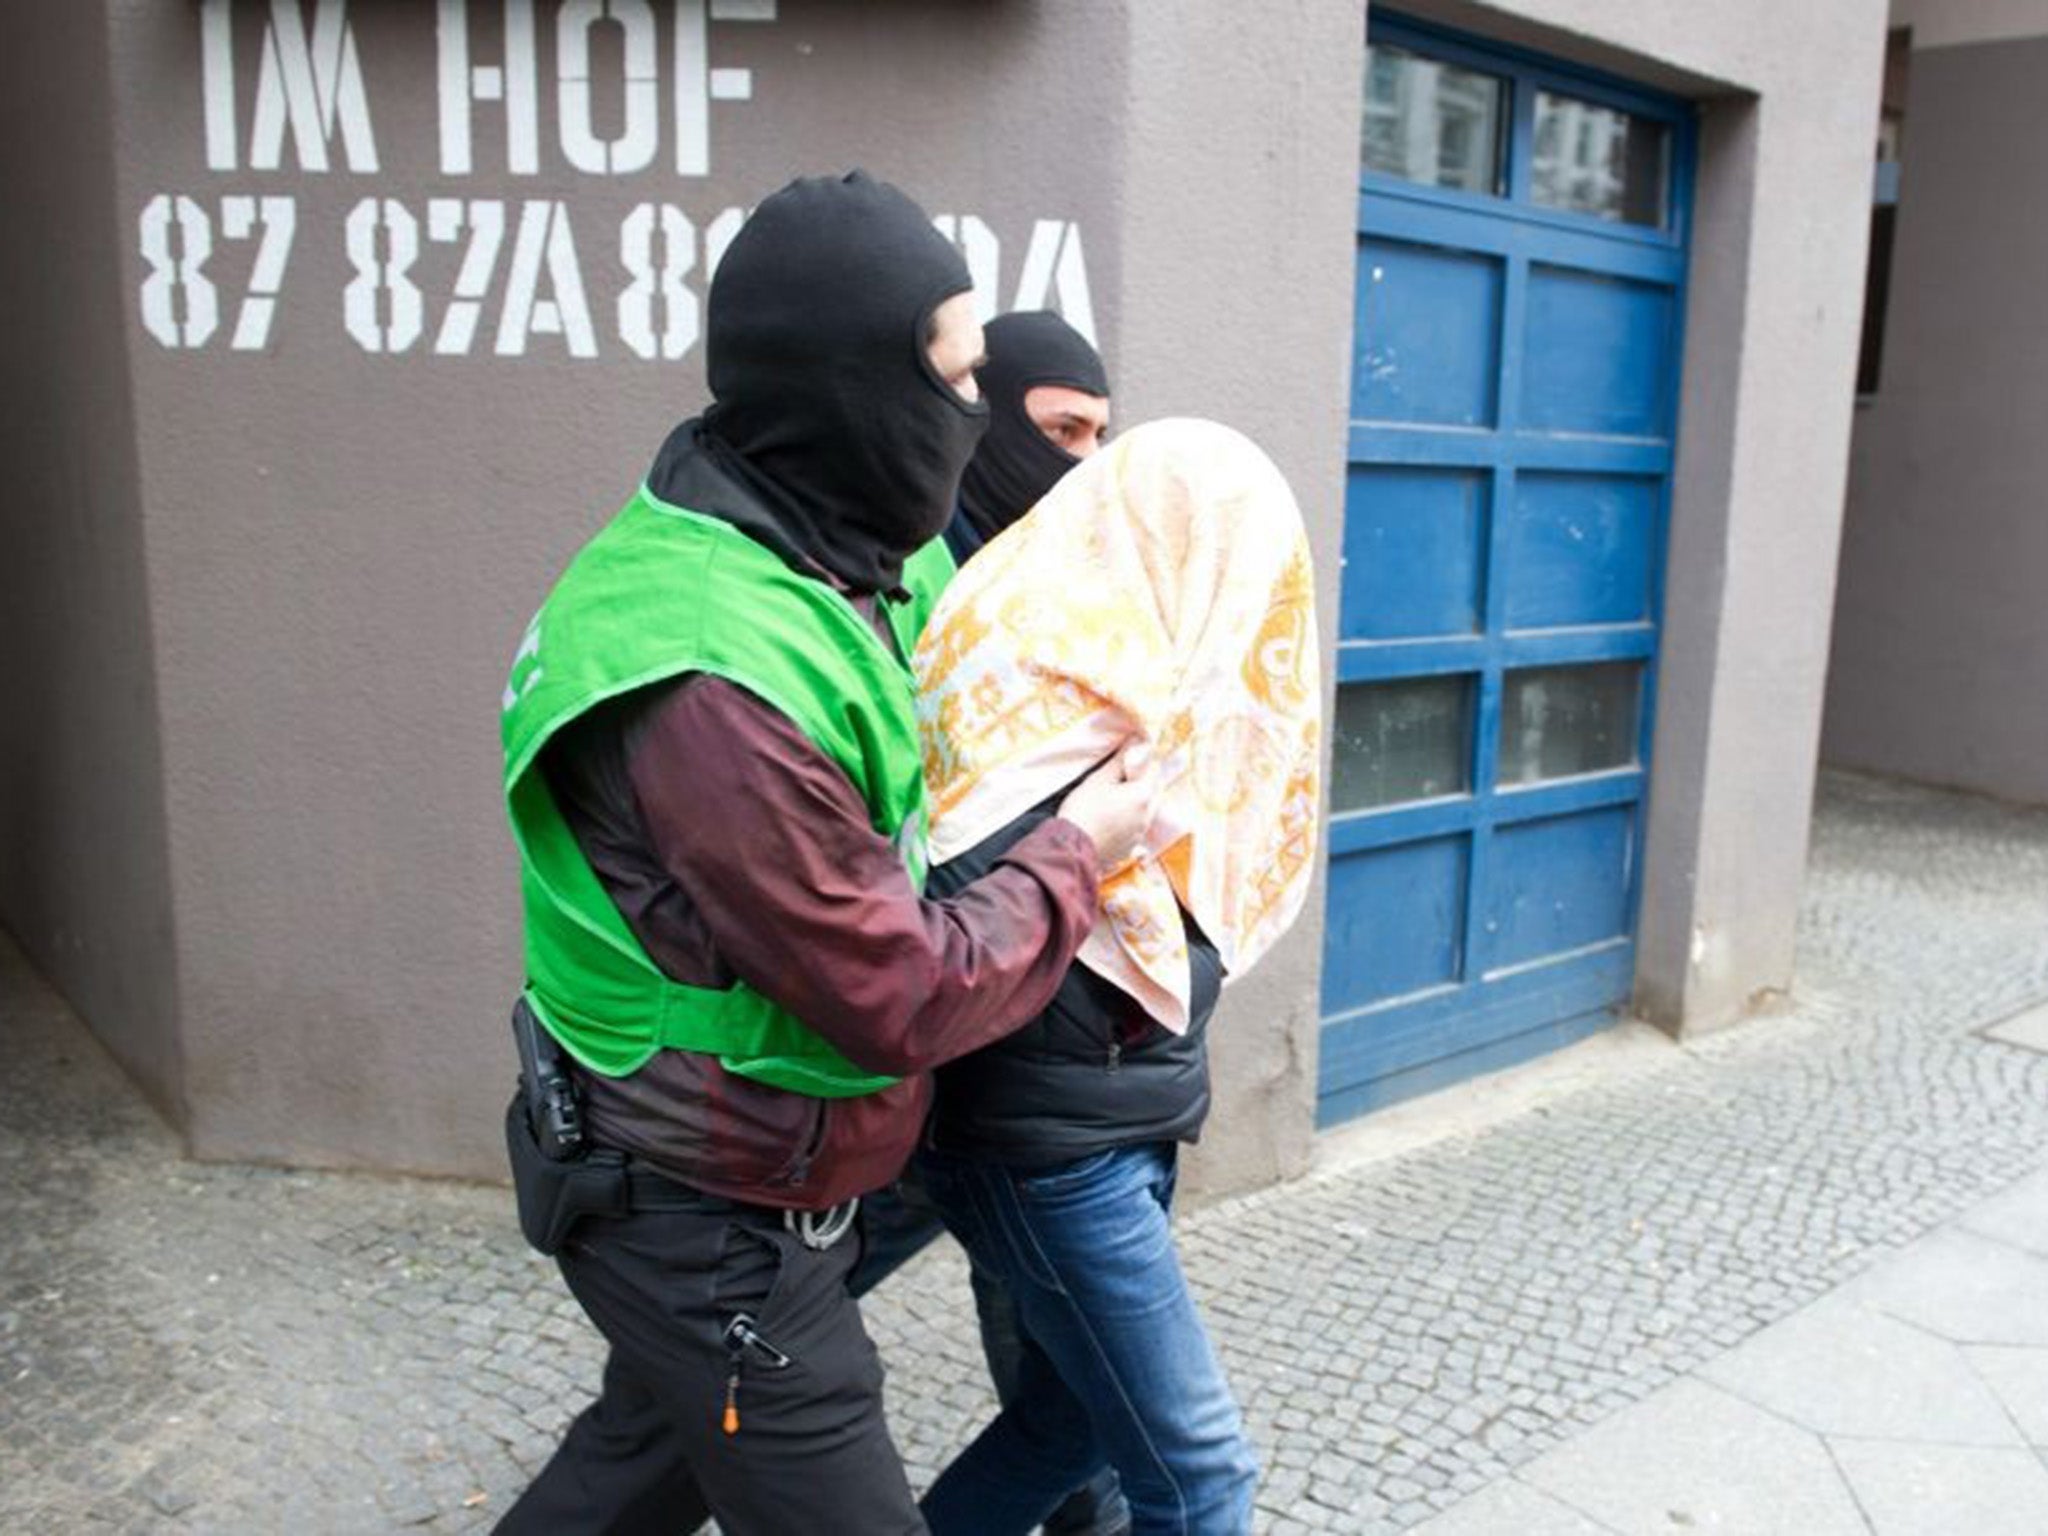 One of the terror suspects being led away by German police